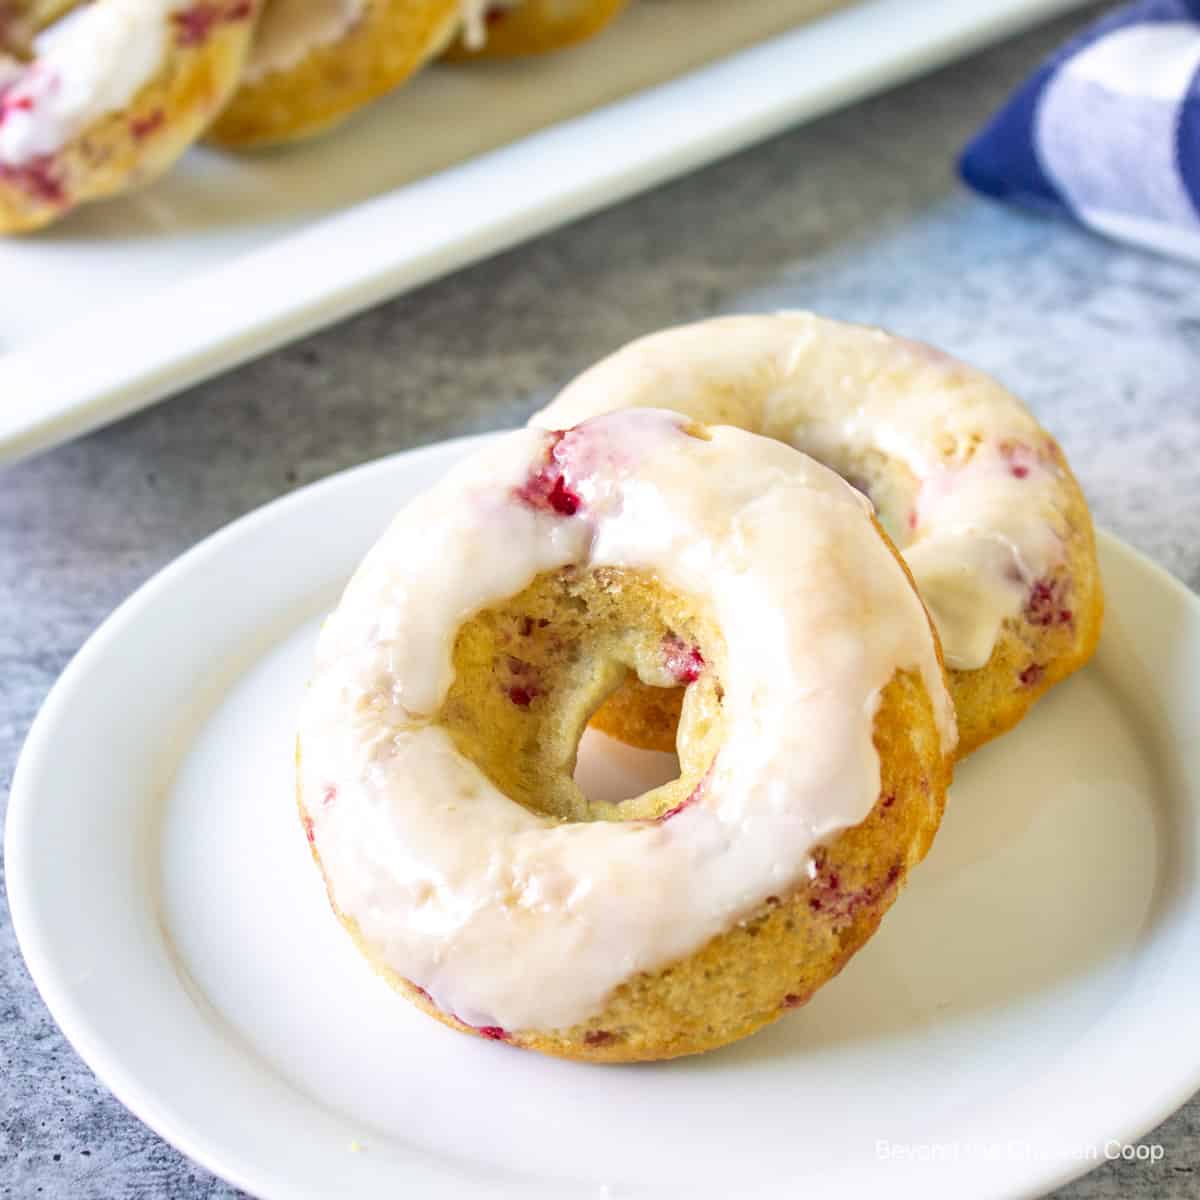 Two donuts topped with a white glaze.